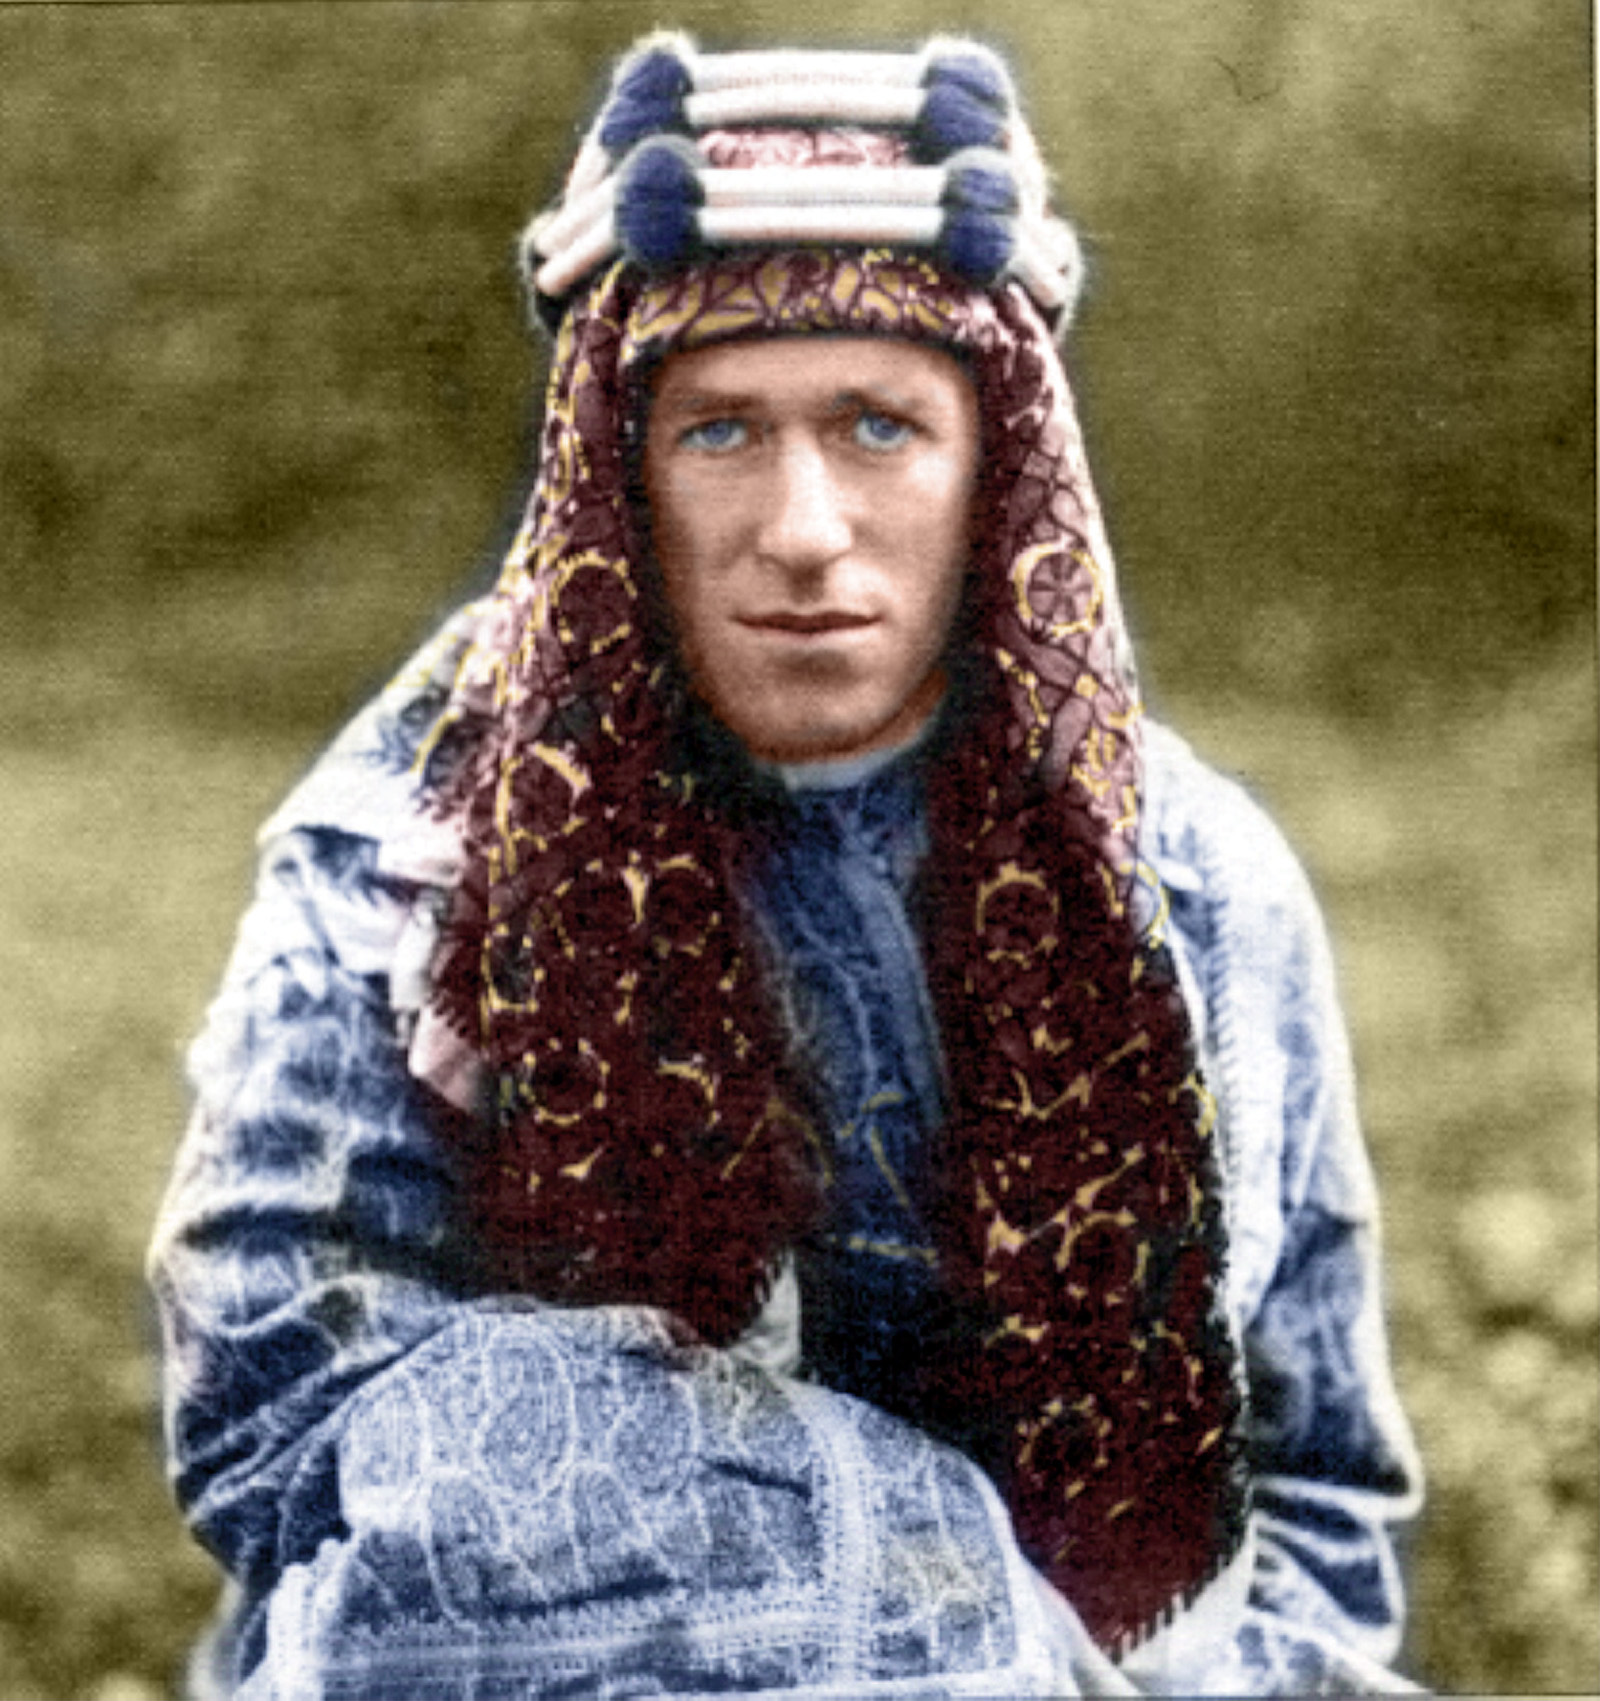 World War I: Arab forces under T. E. Lawrence, also known as 'Lawrence of Arabia' capture Damascus